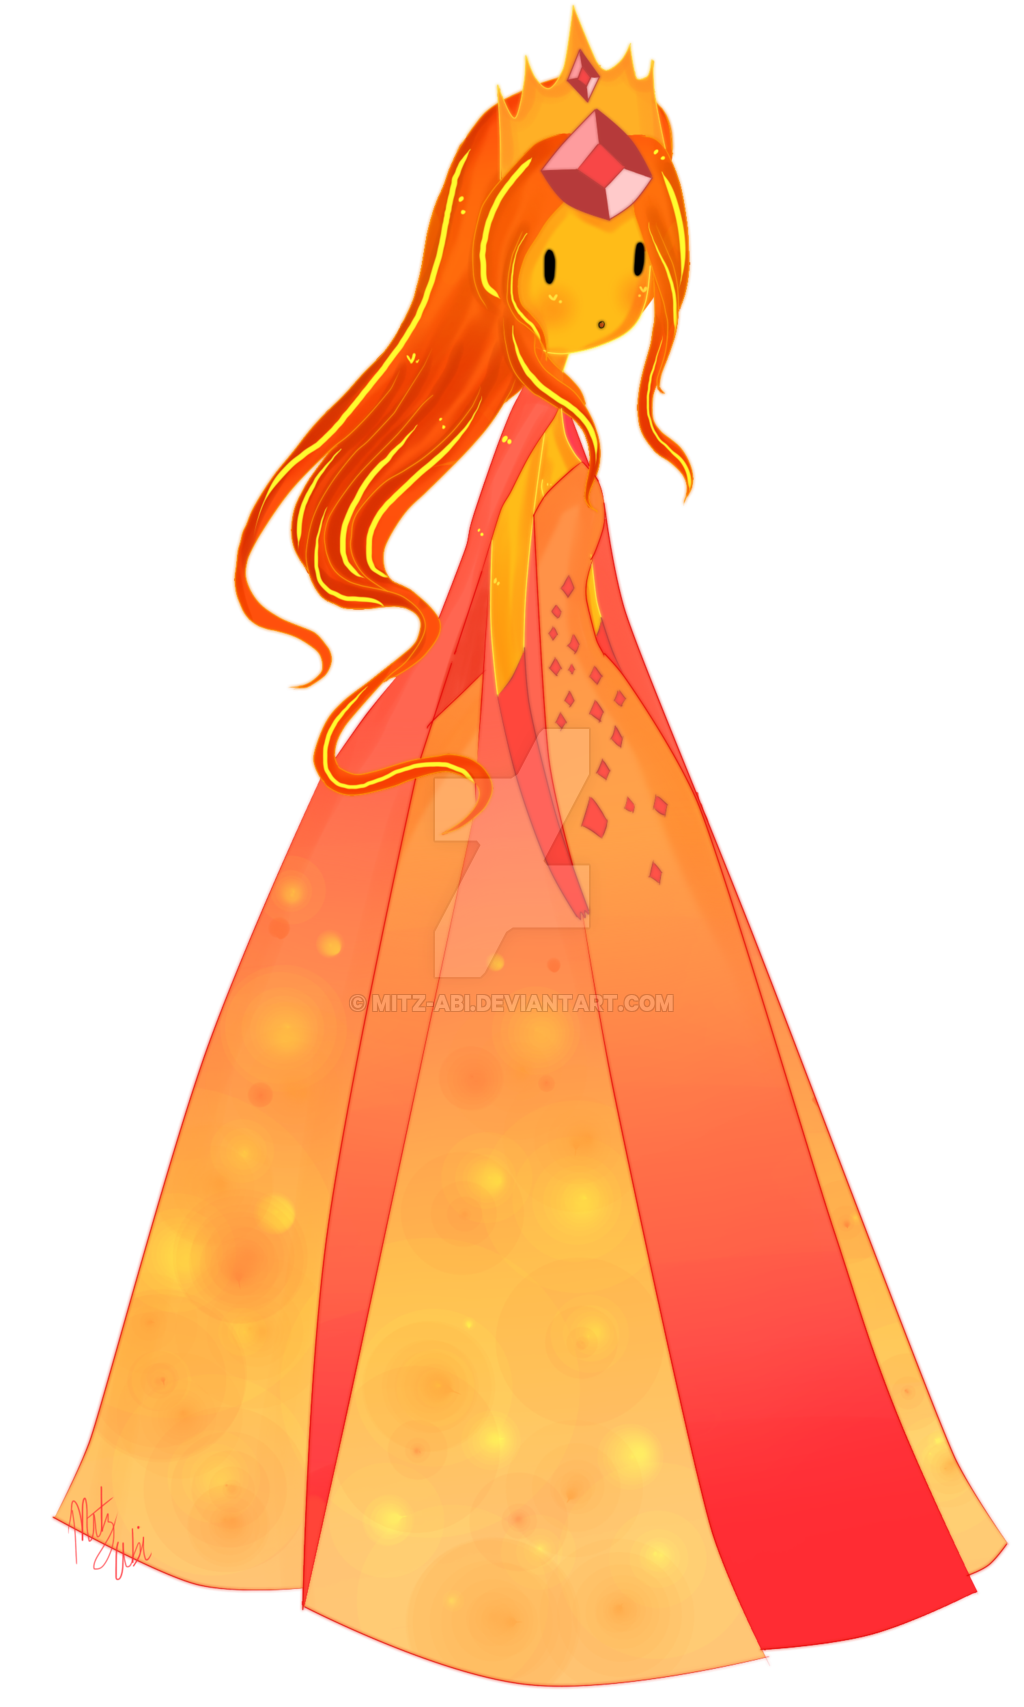 Flame Queen clipart #17, Download drawings